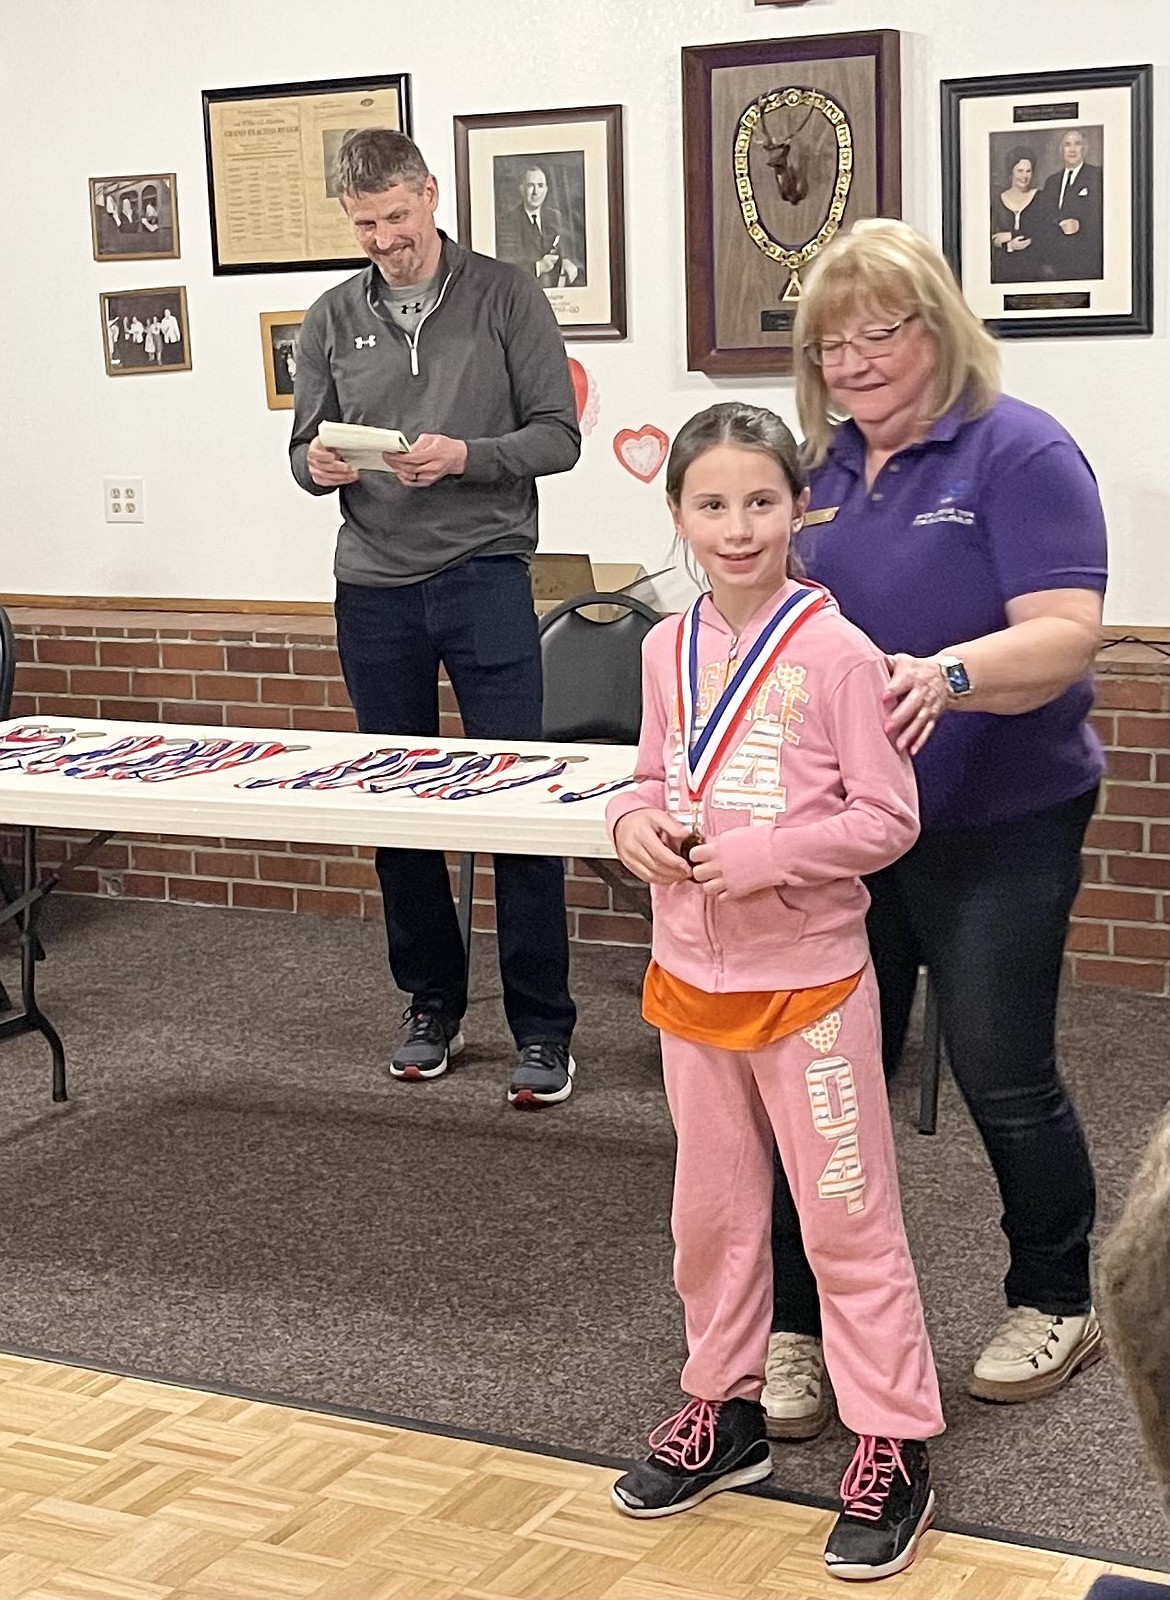 Courtesy photo
Quinn Paulson won the girls 8-9 age group at the Coeur d'Alene Elks Hoop Shoot Feb. 20 at The Courts at Real Life in Post Falls. Also pictured is Debbi Nadrchal, Elks Exalted Ruler.